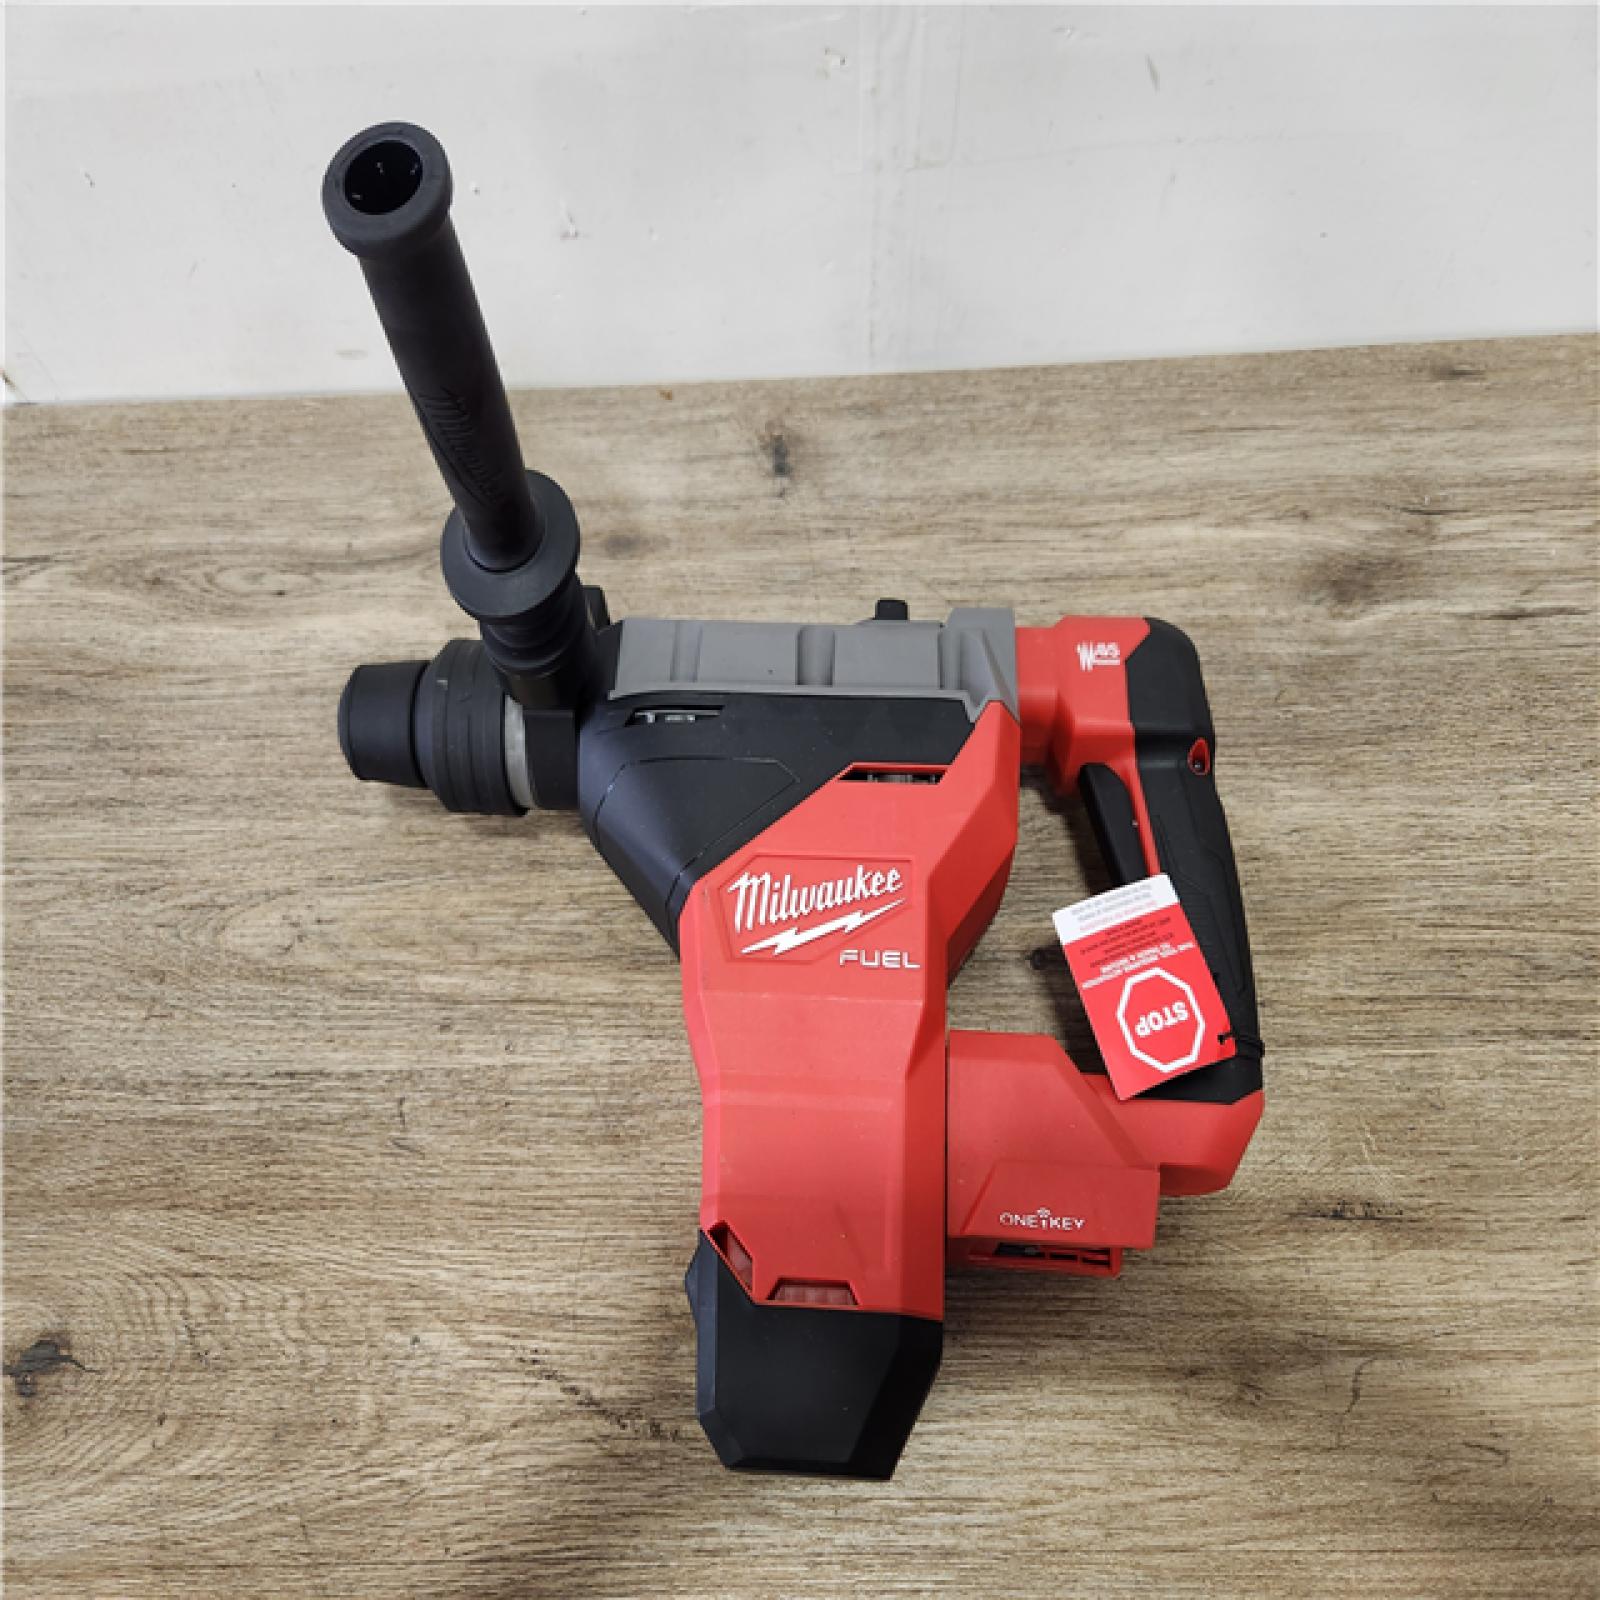 Phoenix Location NEW Milwaukee M18 FUEL ONE-KEY 18V Lithium-Ion Brushless Cordless 1-3/4 in. SDS-MAX Rotary Hammer (Tool Only) (Doesn't Power On - One Key Lights Up)